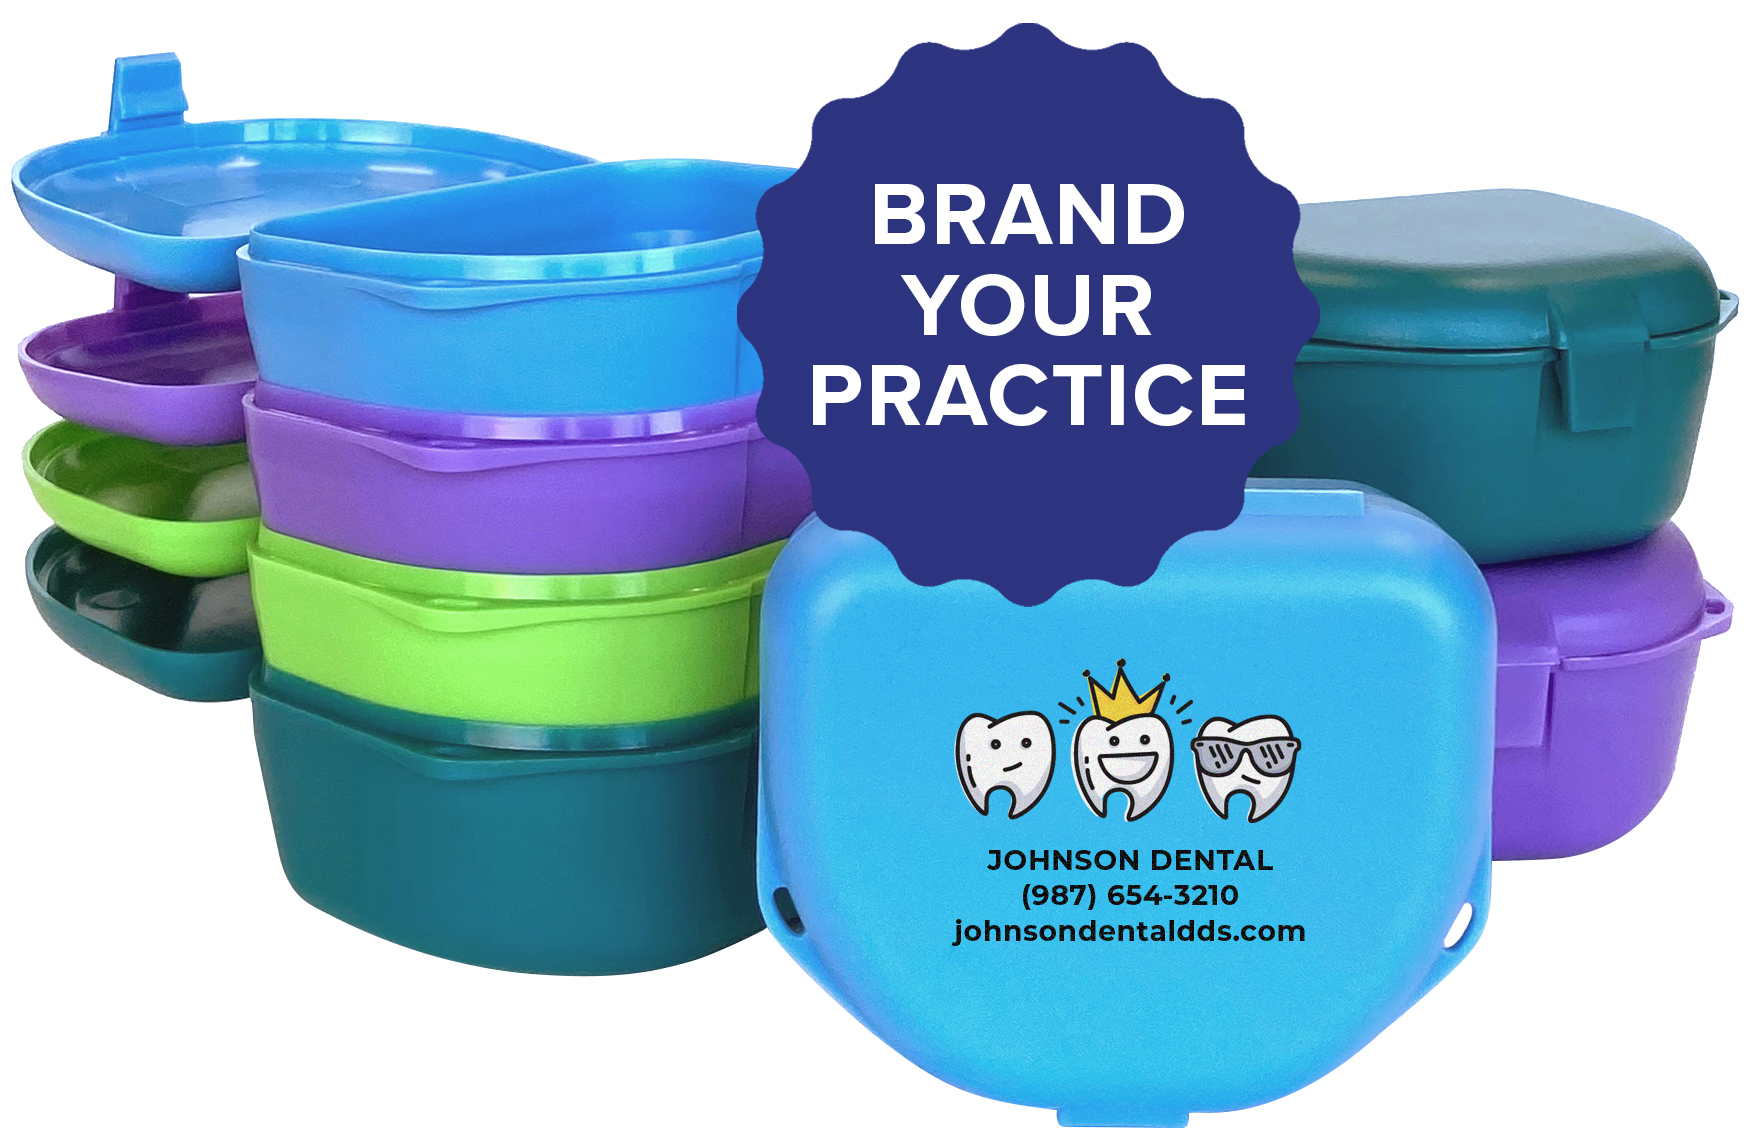 Denture & Retainer Boxes, Products